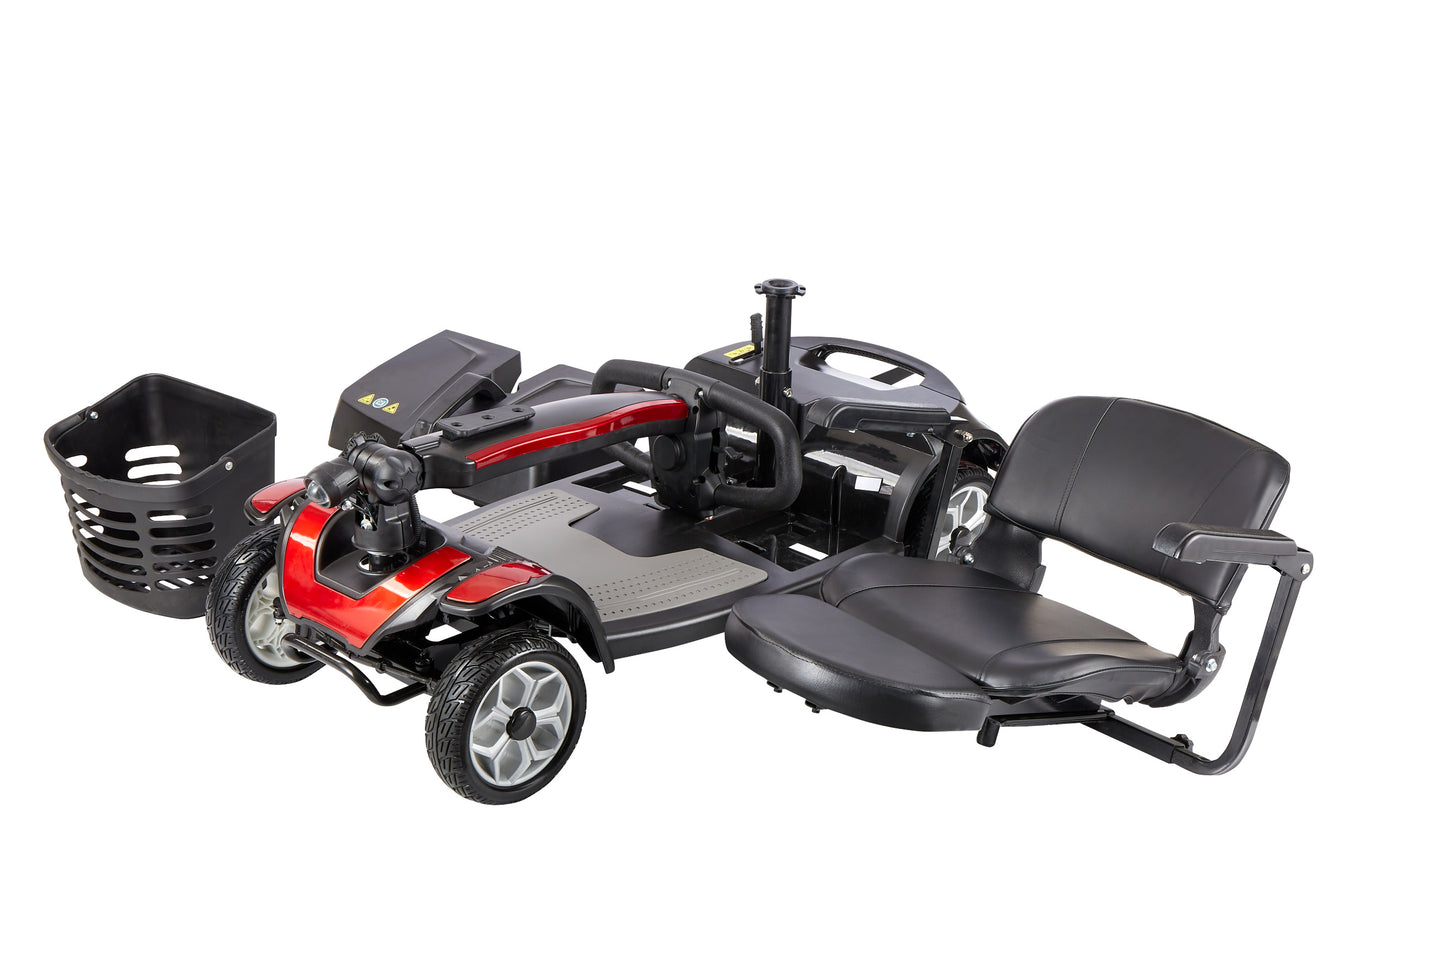 Mantra - 4 Wheel Foldable Light Weight Scooter in stock